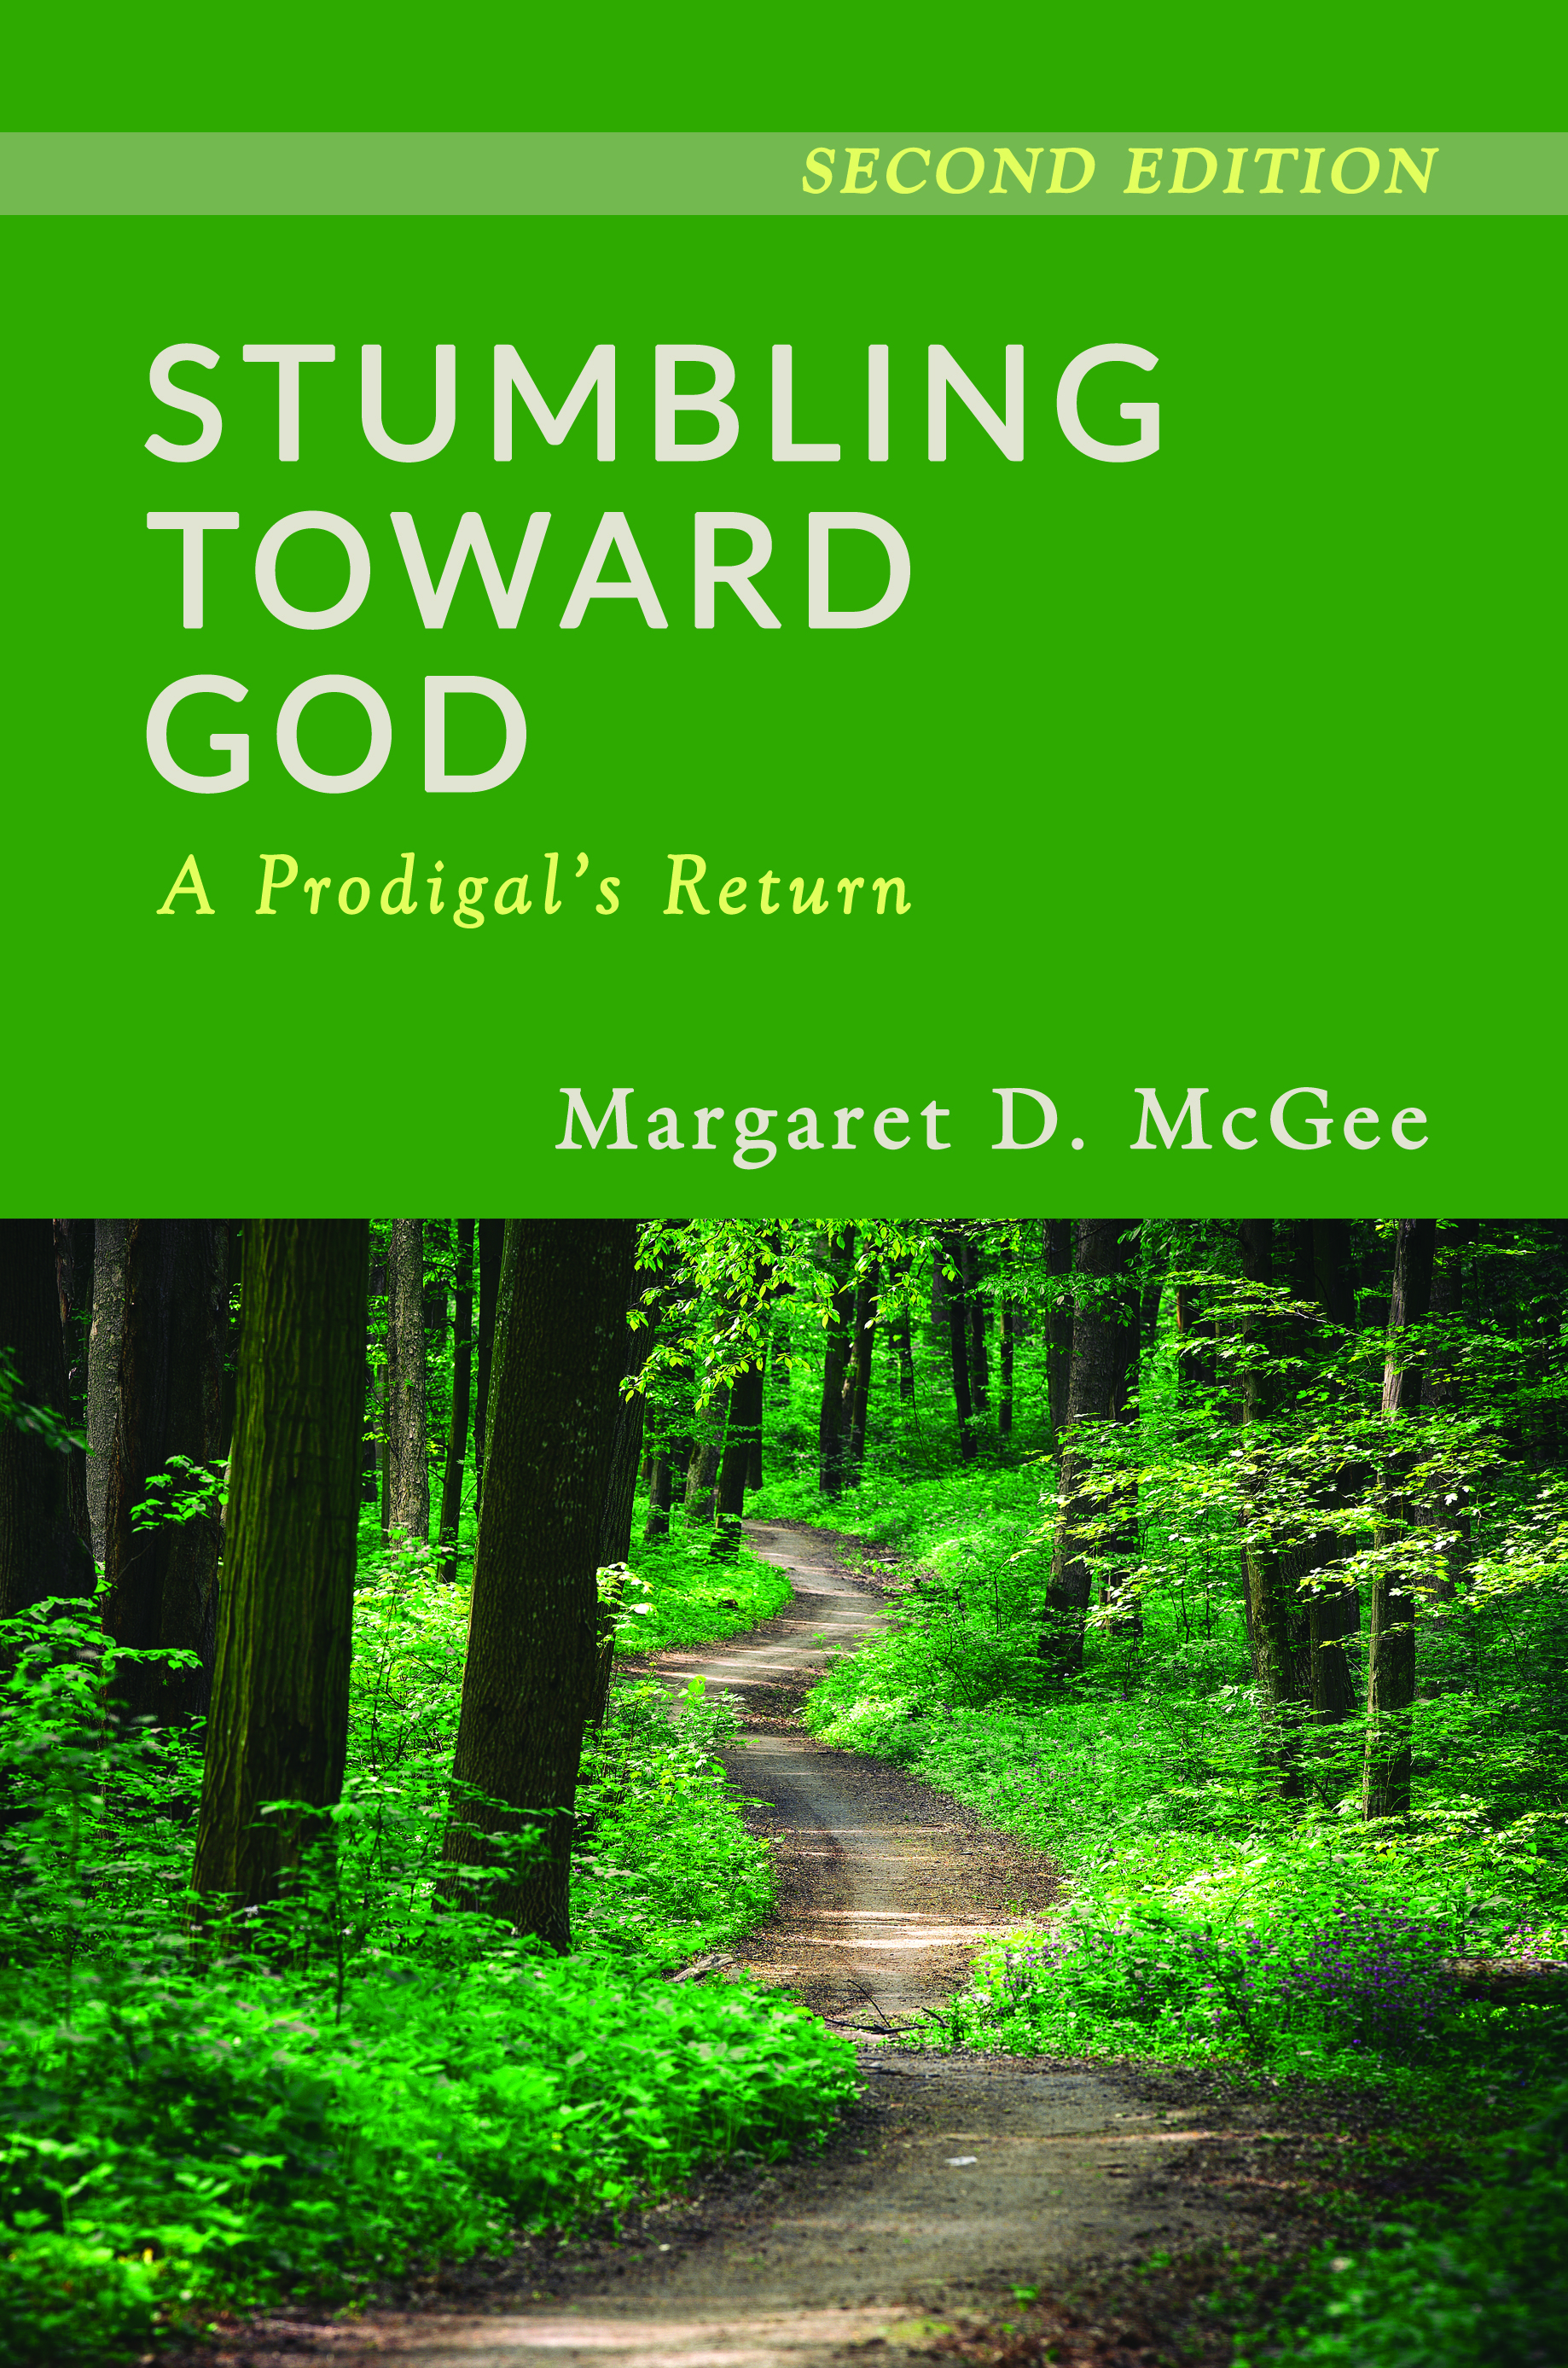 Book cover for the second edition of Stumbling Toward God, showing a path leading into green woods.